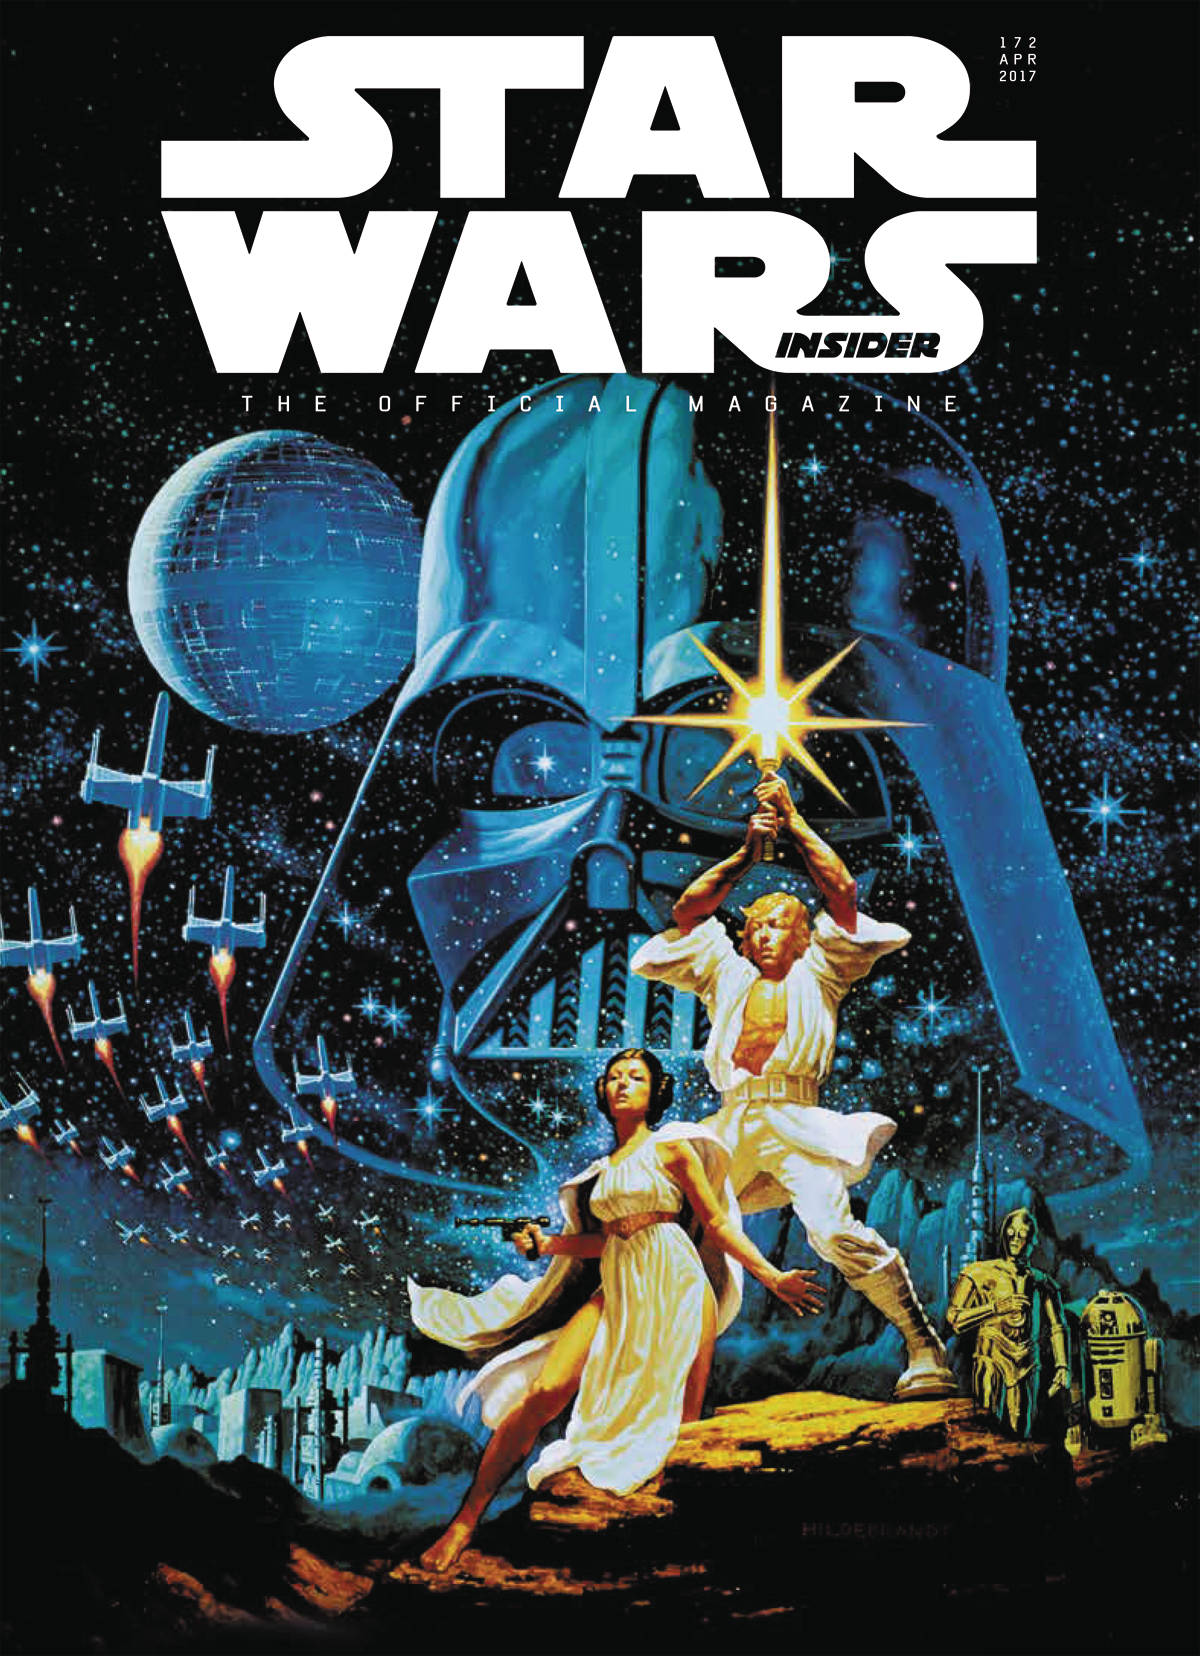 Star Wars Insider #172 (Comic Store Cover)